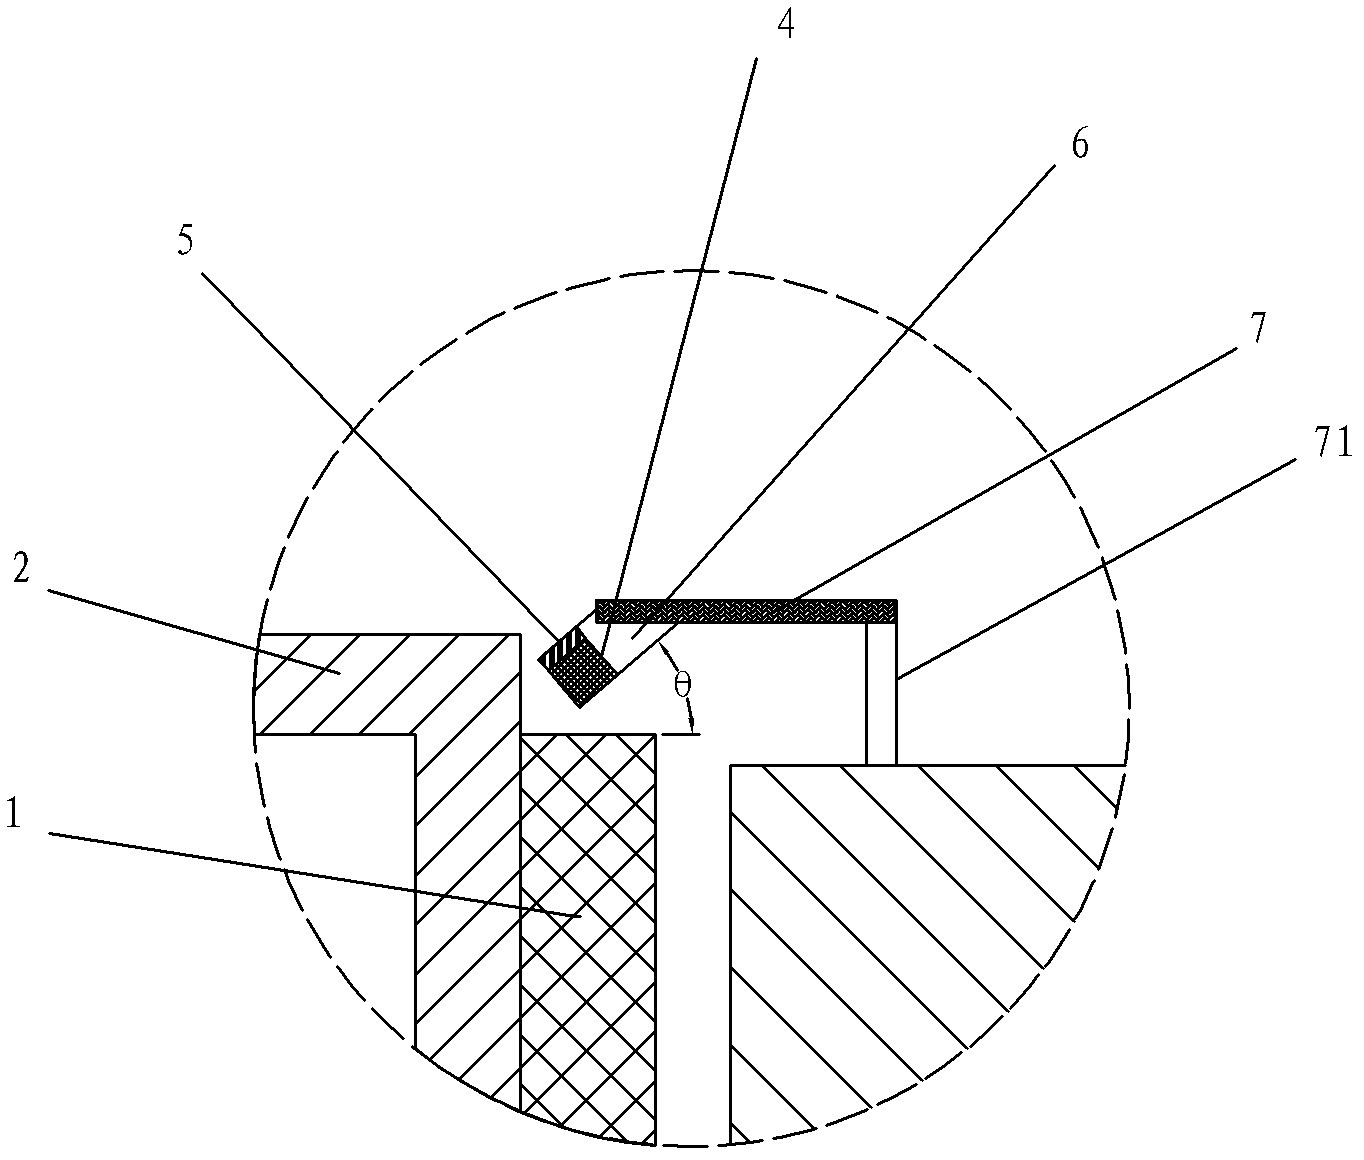 Rotor position detection device for permanent magnet motor